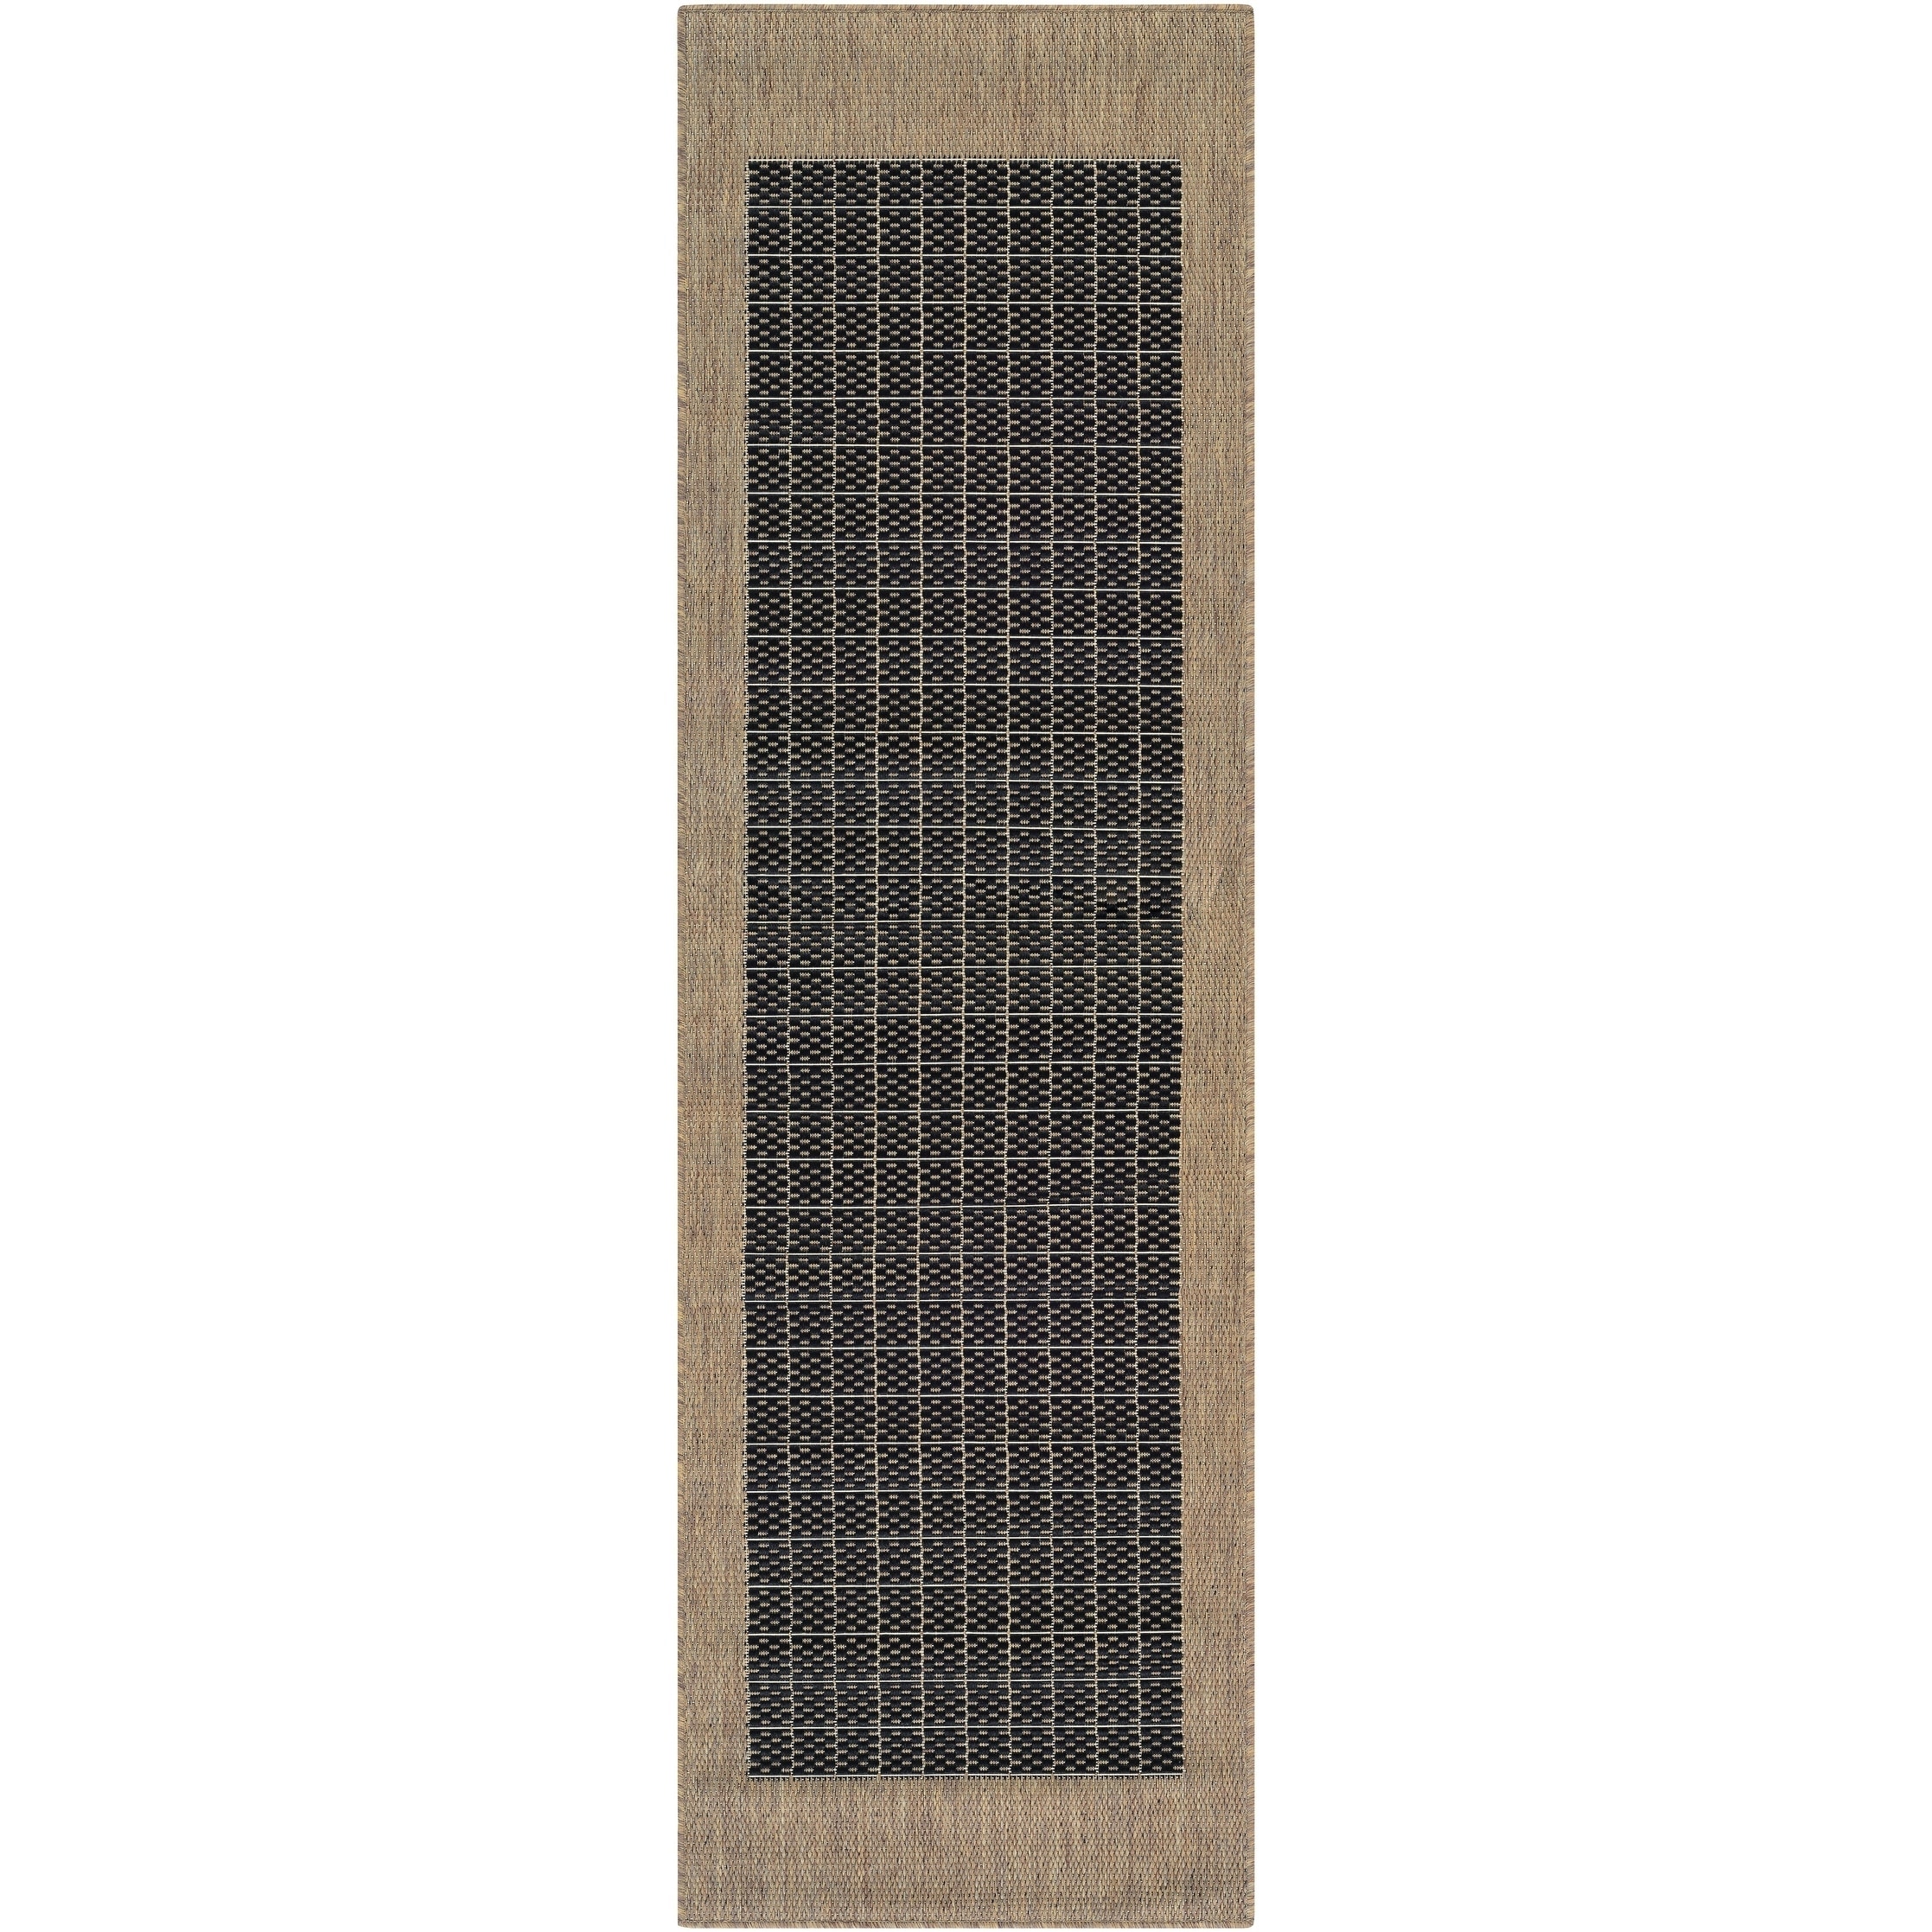 Recife Checkered Field/ Black Cocoa Runner Rug (23 x 119) Today $